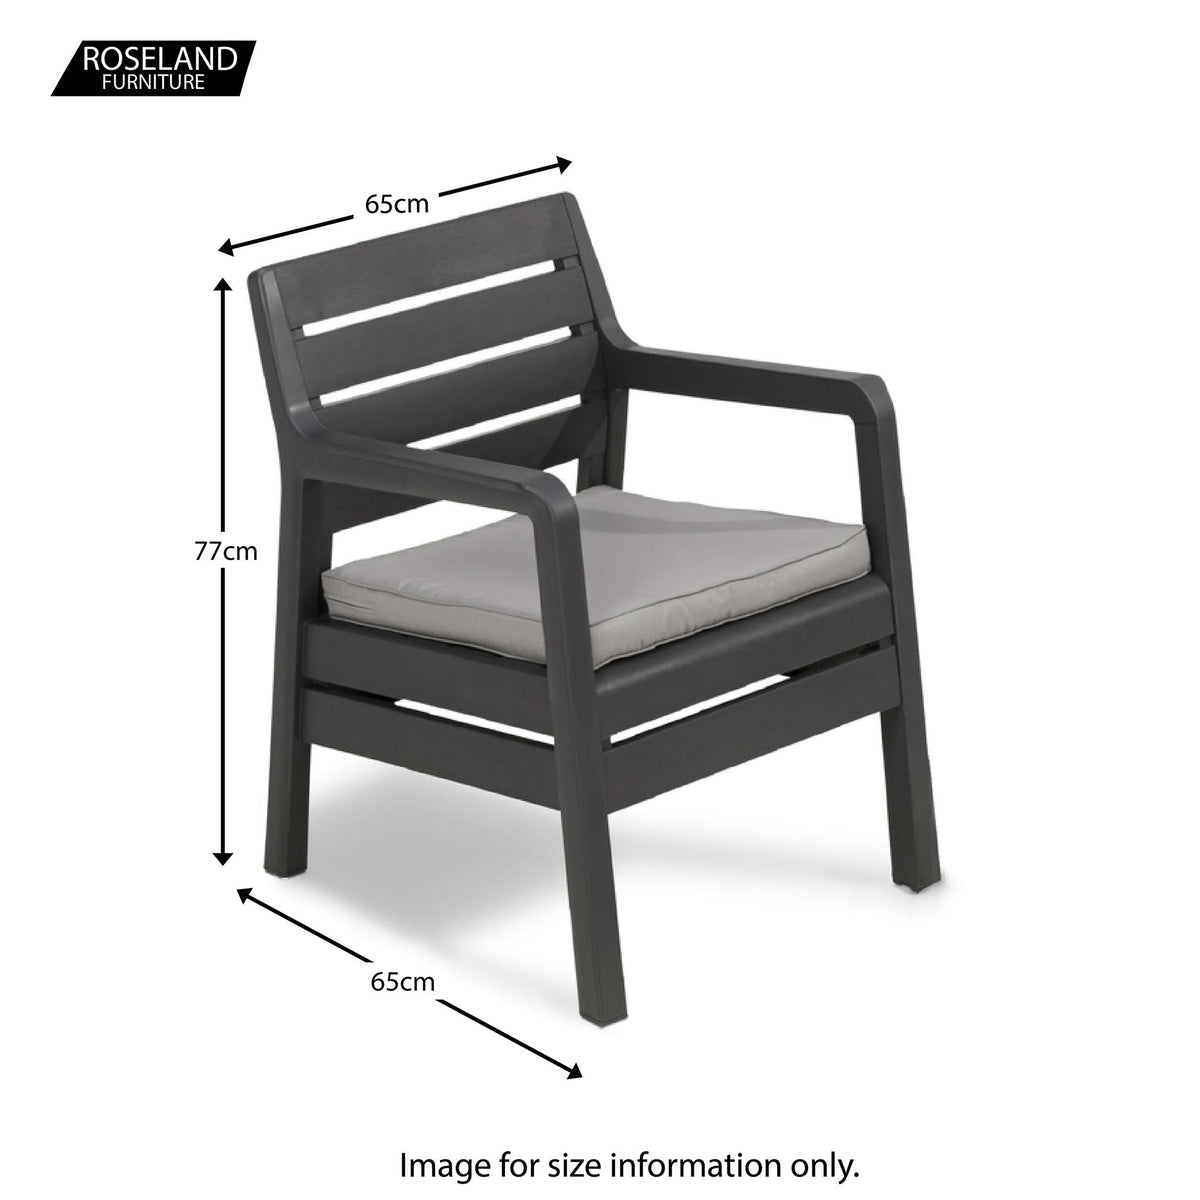 Allibert Balcony Set - Size Guide for Chair